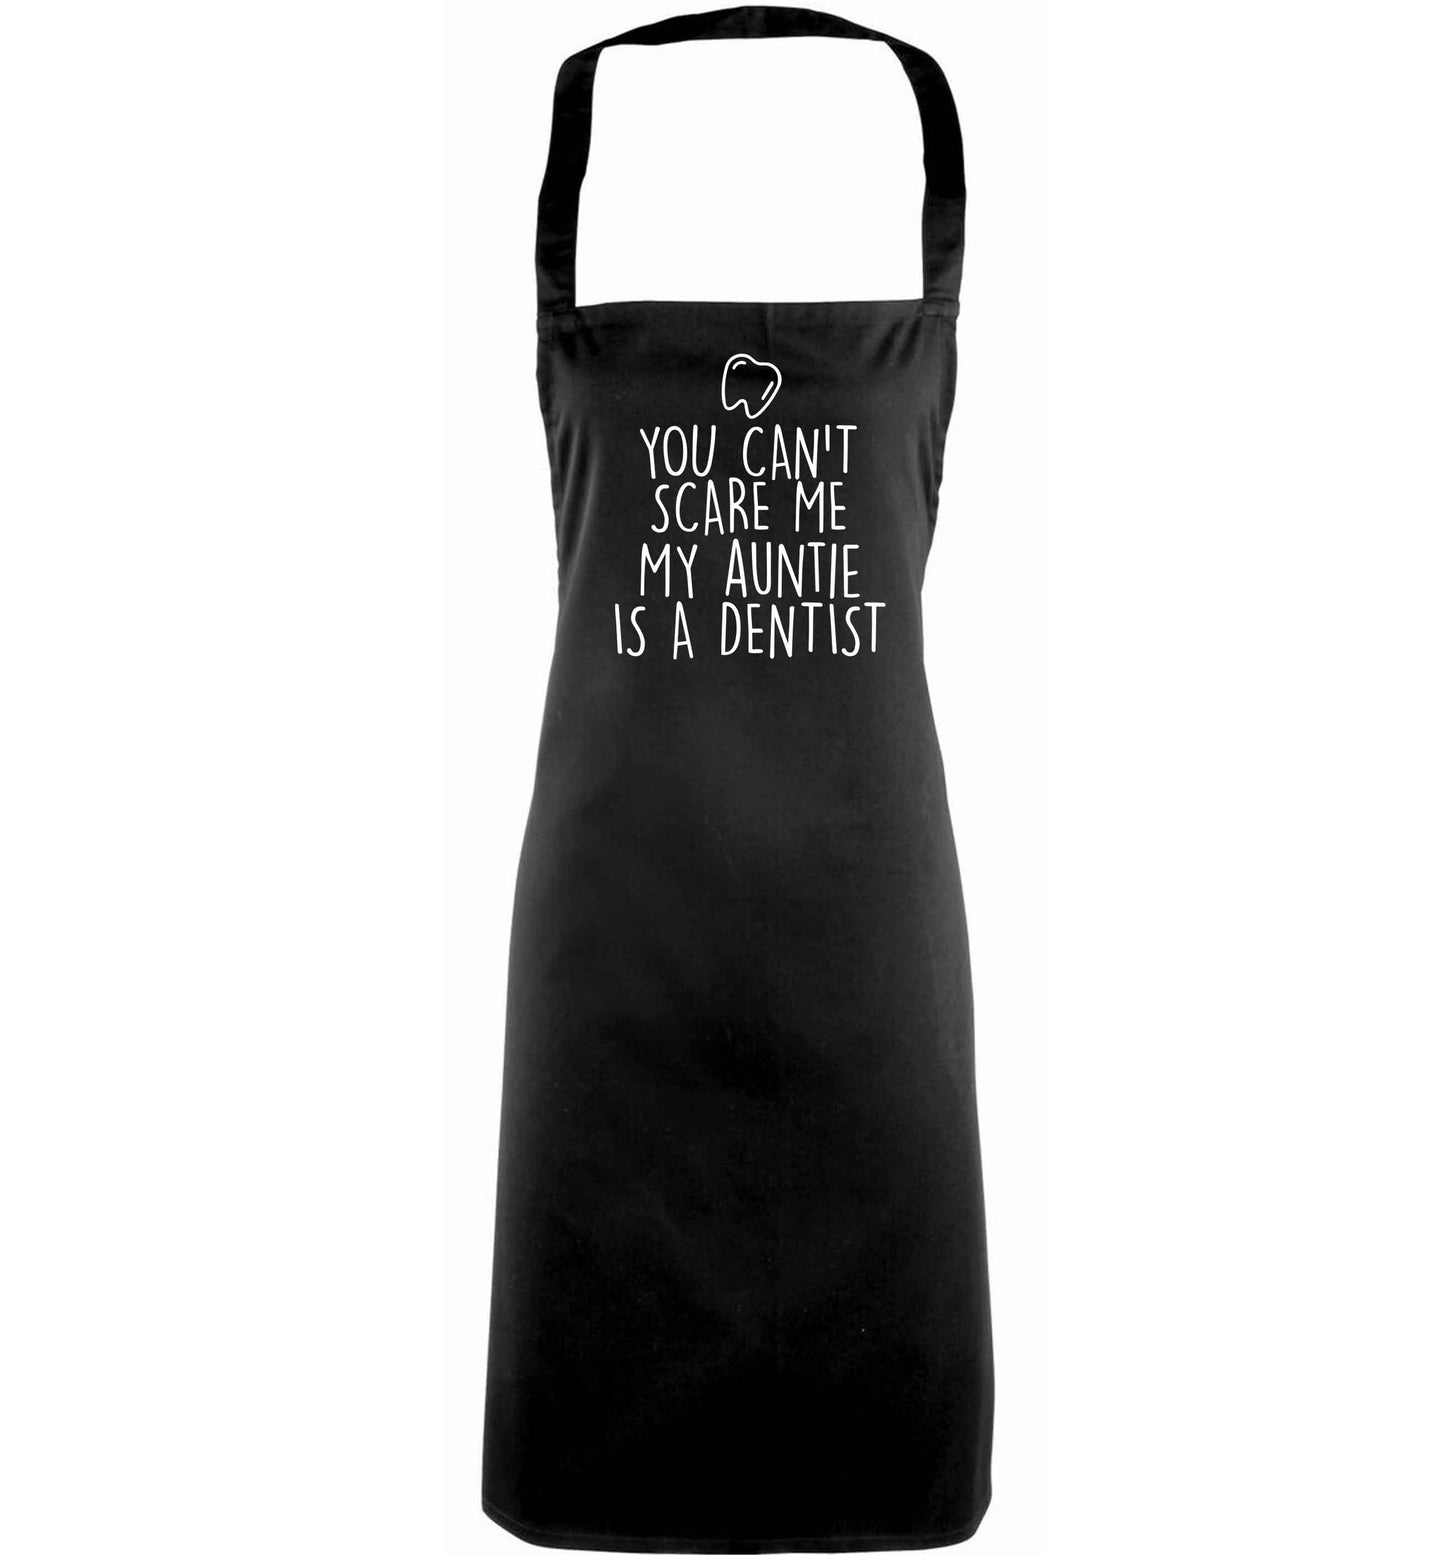 You can't scare me my auntie is a dentist adults black apron